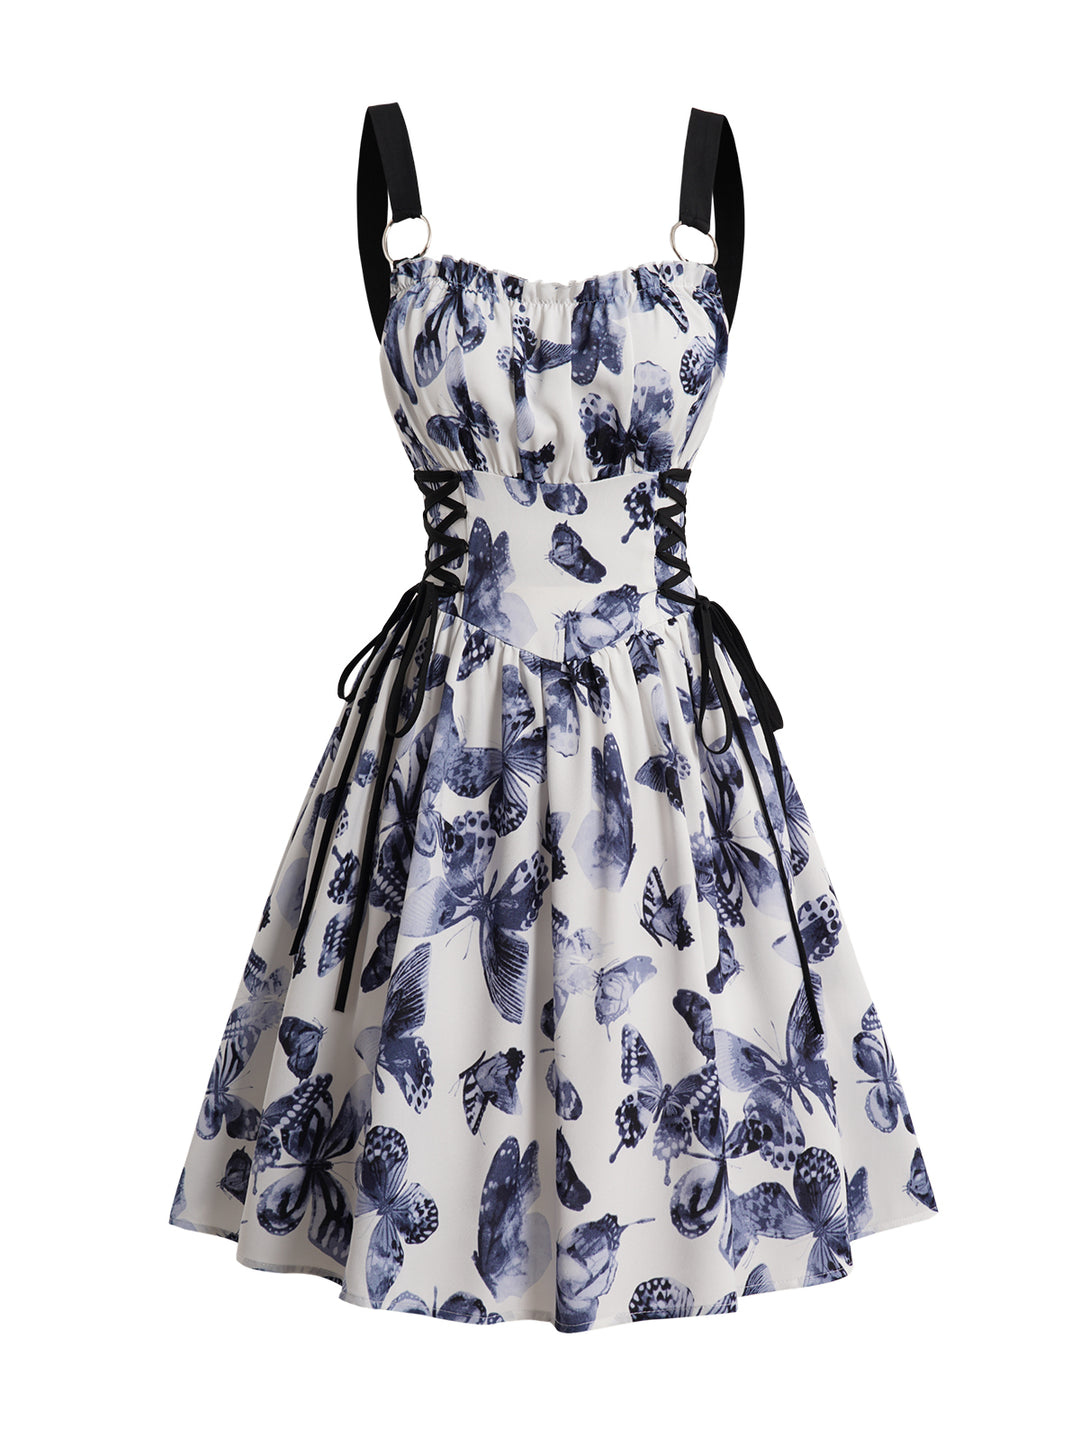 Butterfly Print Lace Up O Ring Ruffle Trim Zip Back Dress